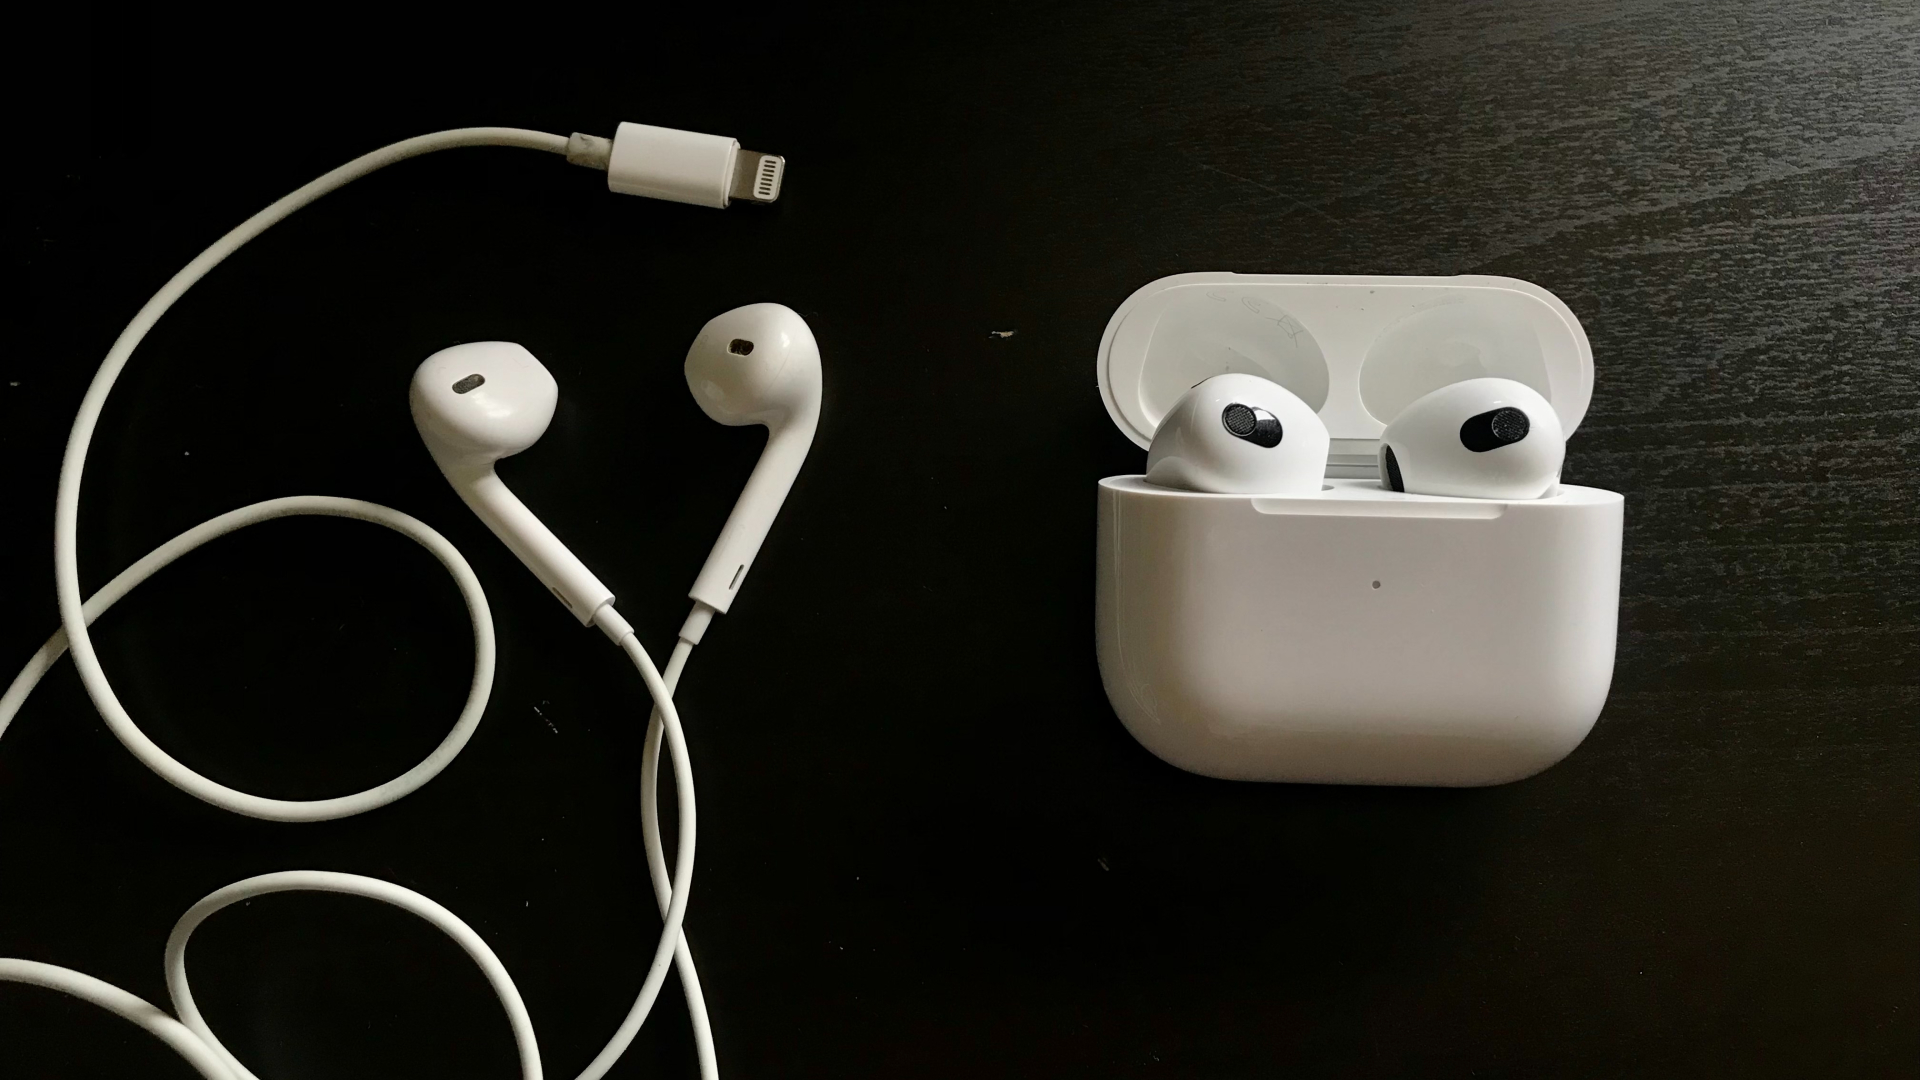 Apple AirPods 2 vs AirPods Pro: which Apple earbuds are better?